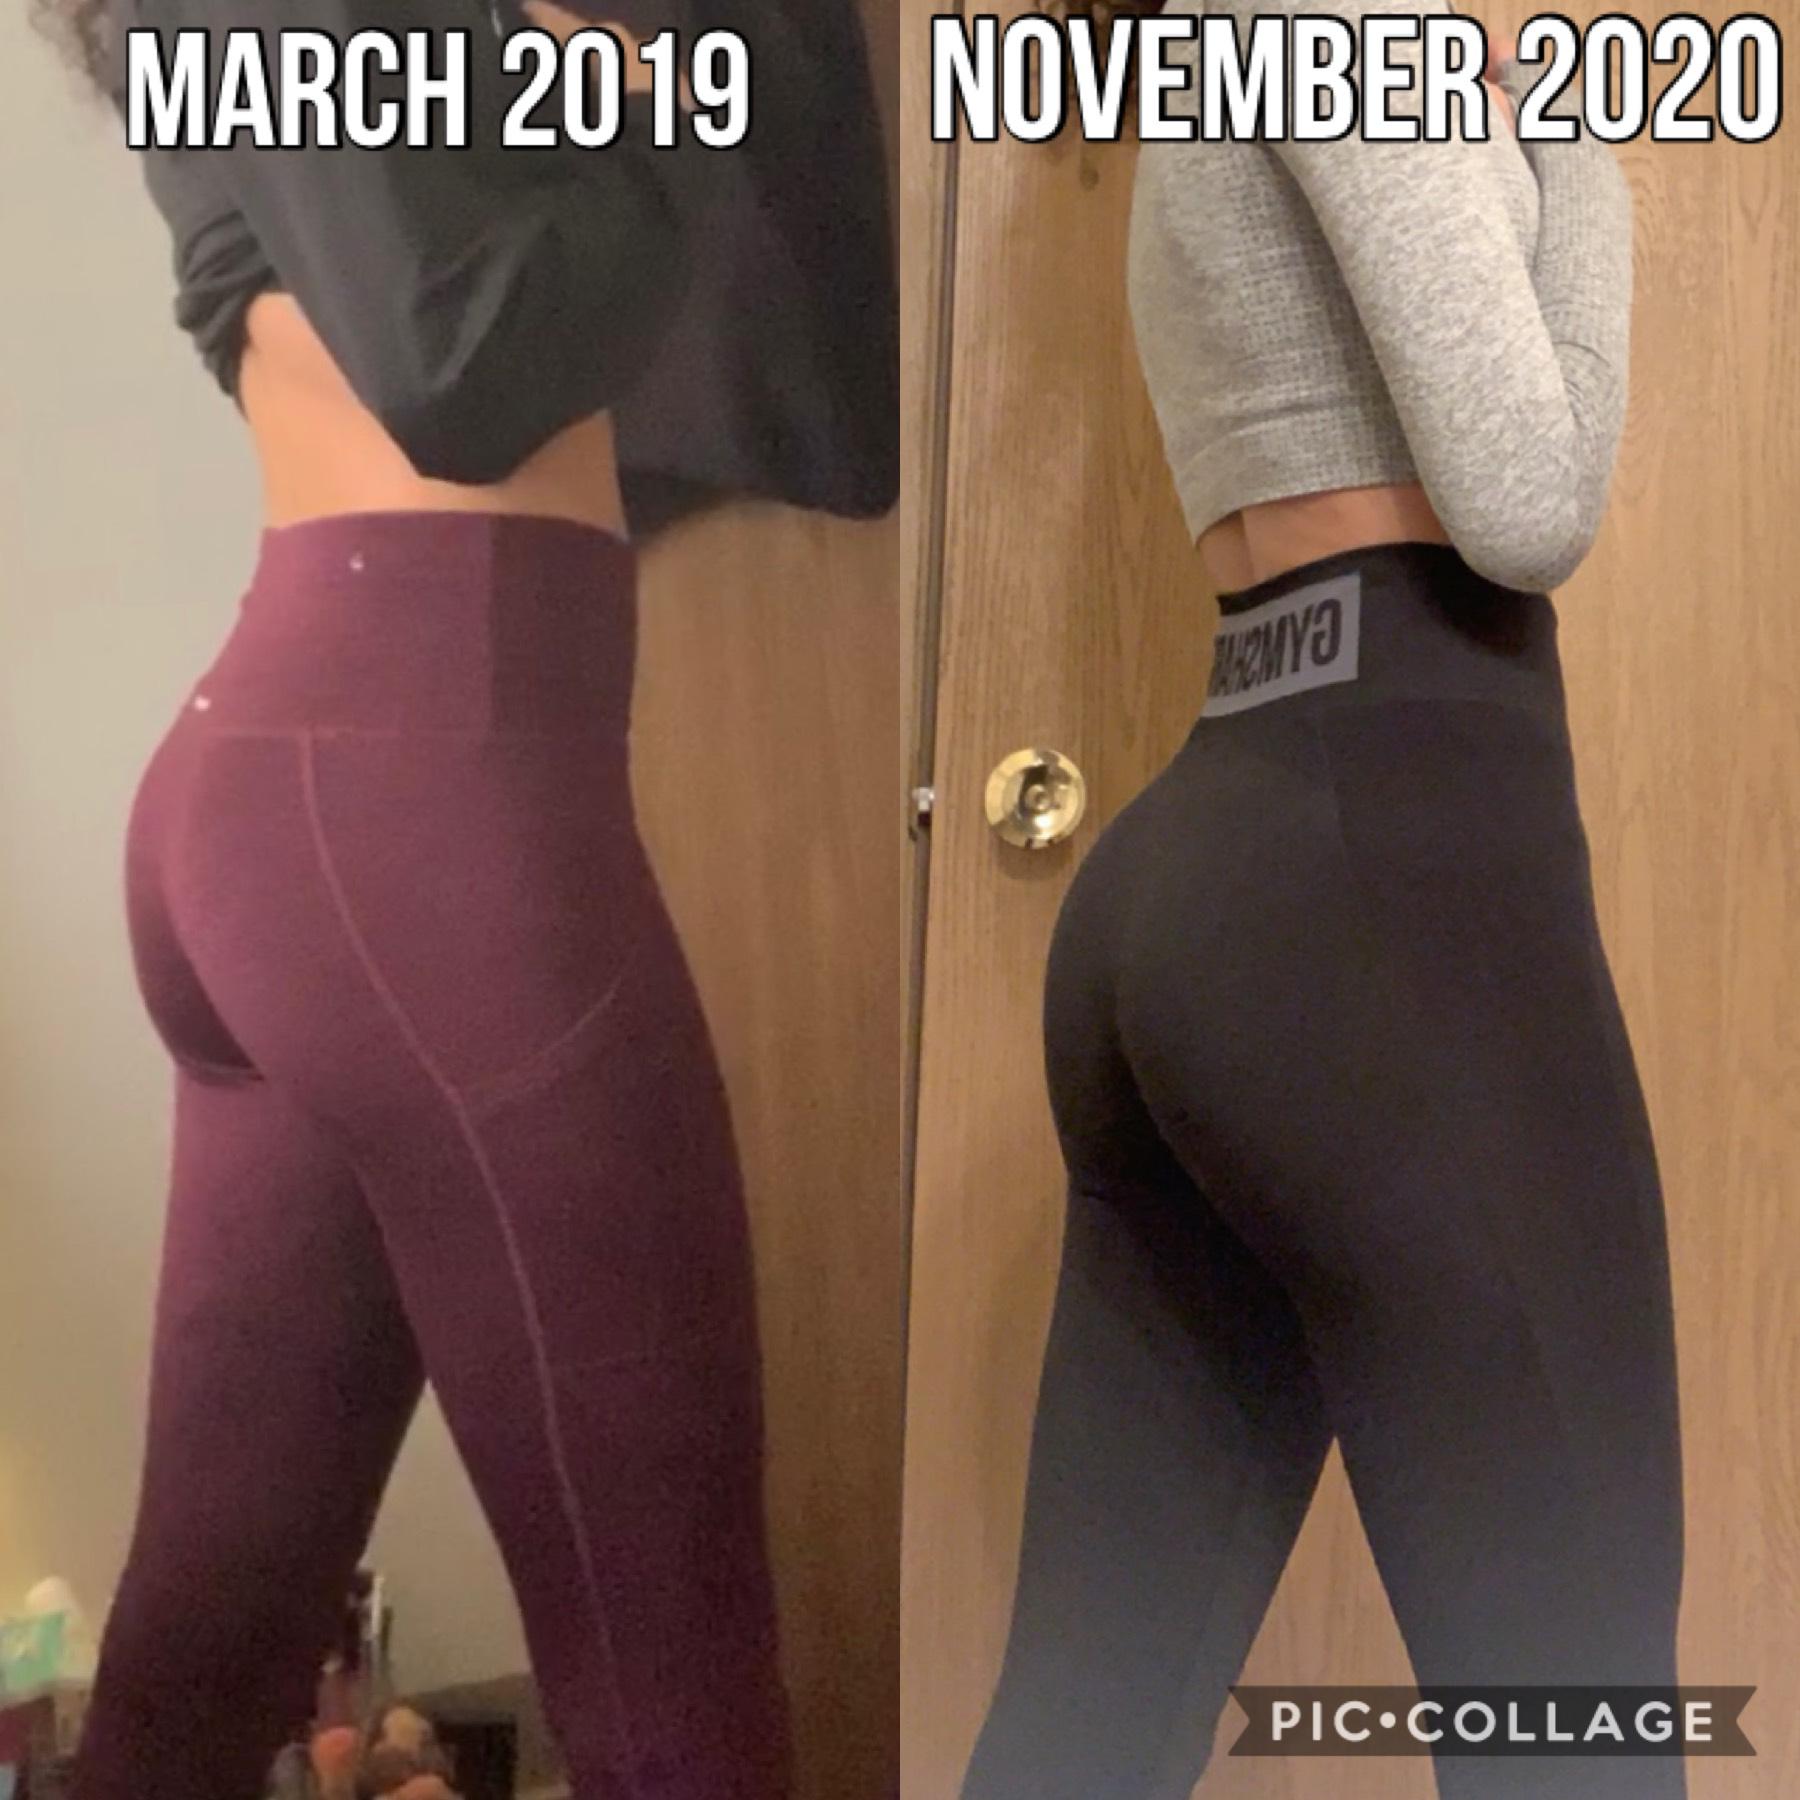 angles and progress ladies... also heck em im using this app for fitness now too since nobodys on it anyways so i literally post anything i want just for myself